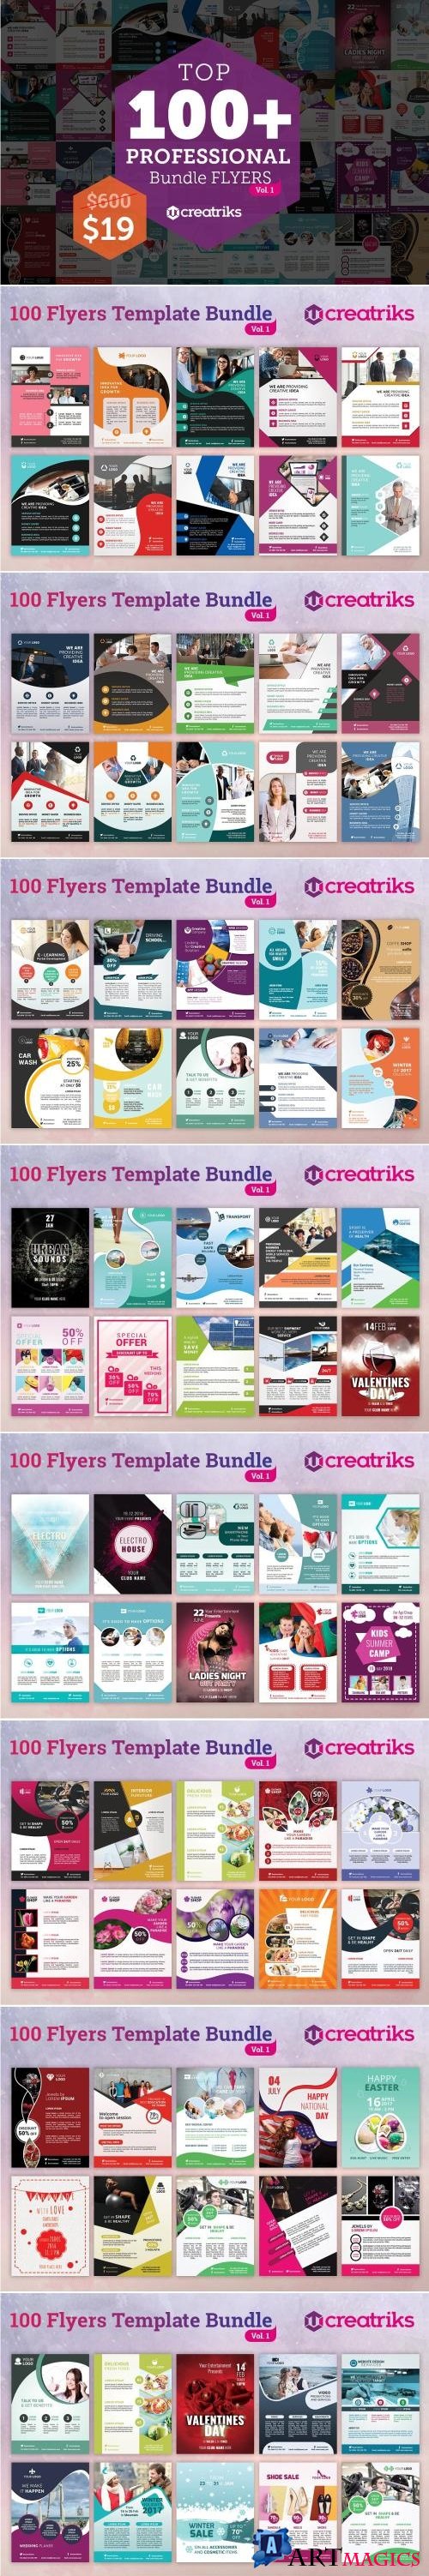 100+ Awesome Flyer Templates - 1740696